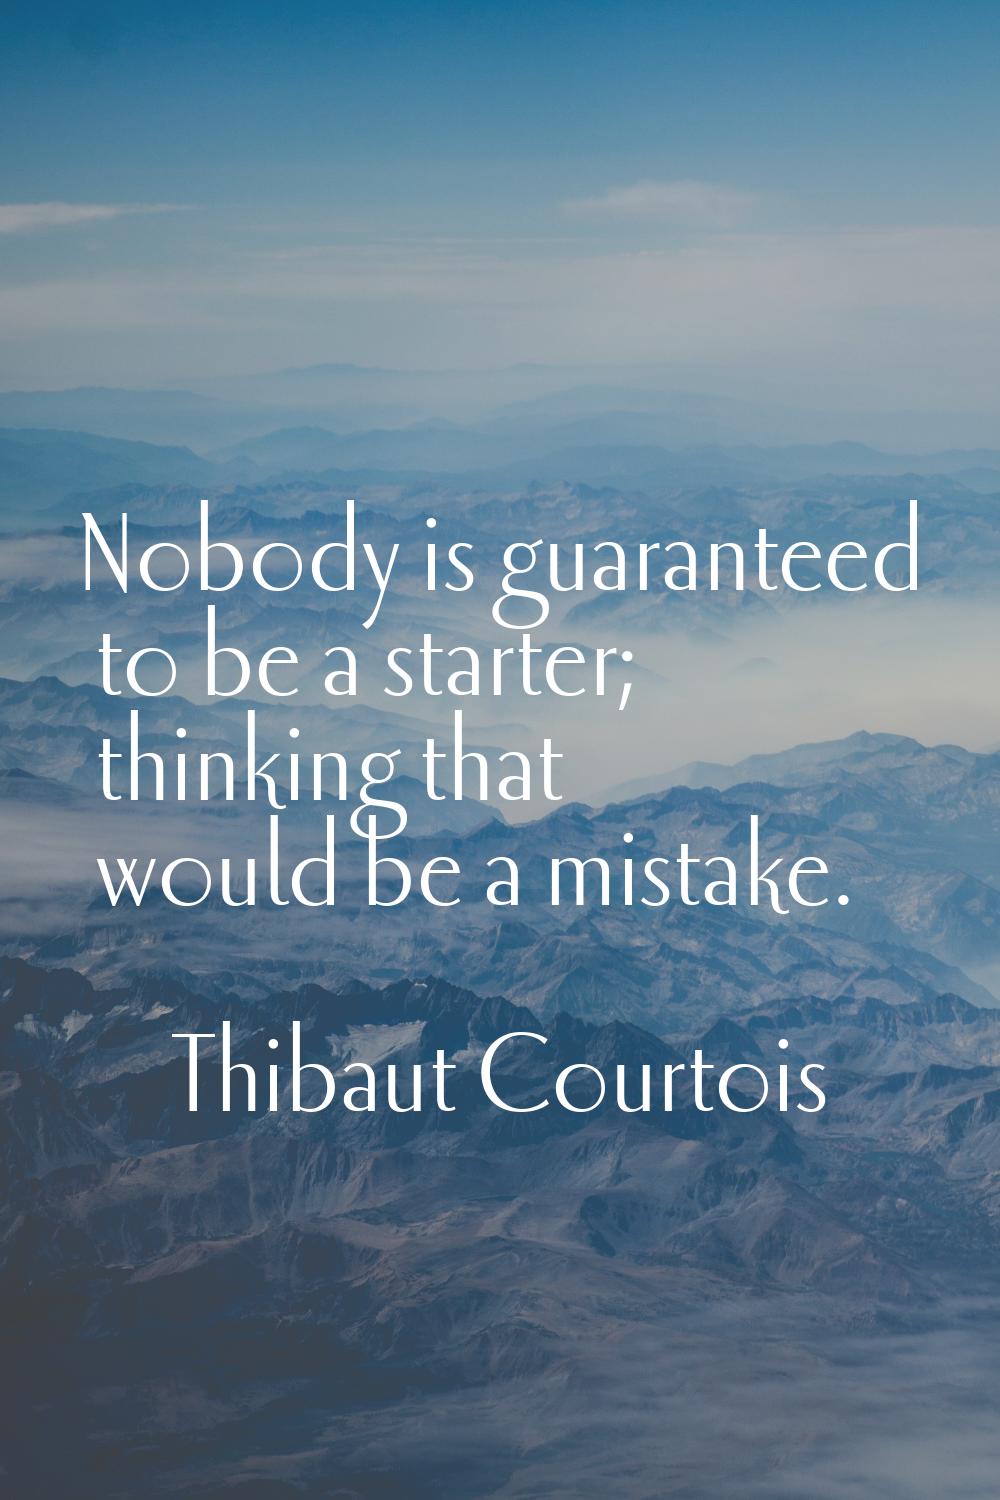 Nobody is guaranteed to be a starter; thinking that would be a mistake.